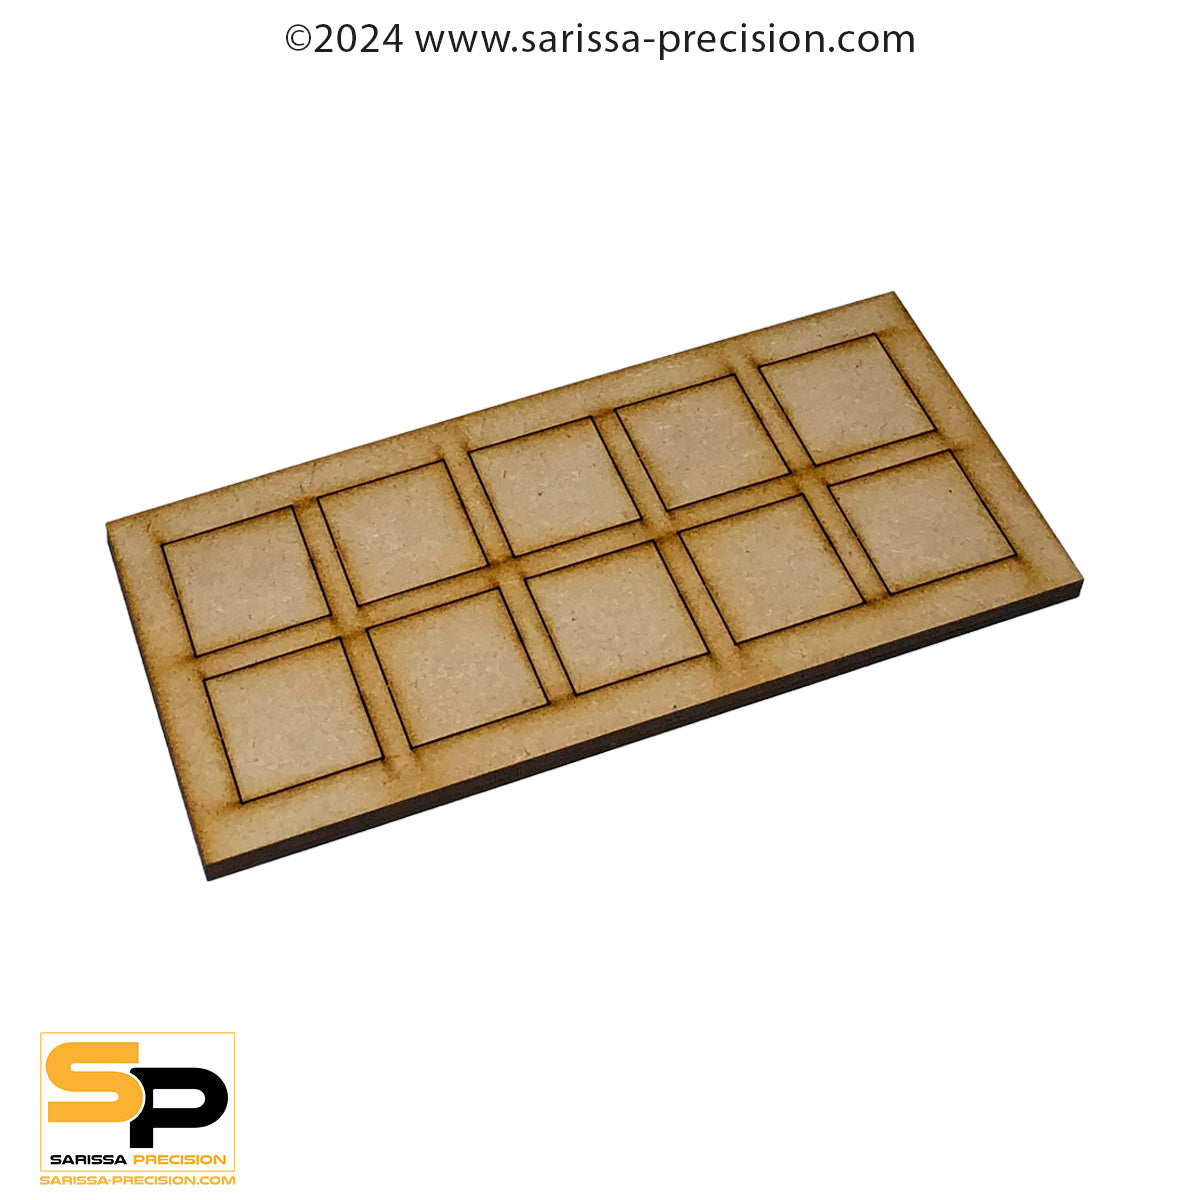 11 x 2 30x30mm Conversion Tray for 25x25mm bases